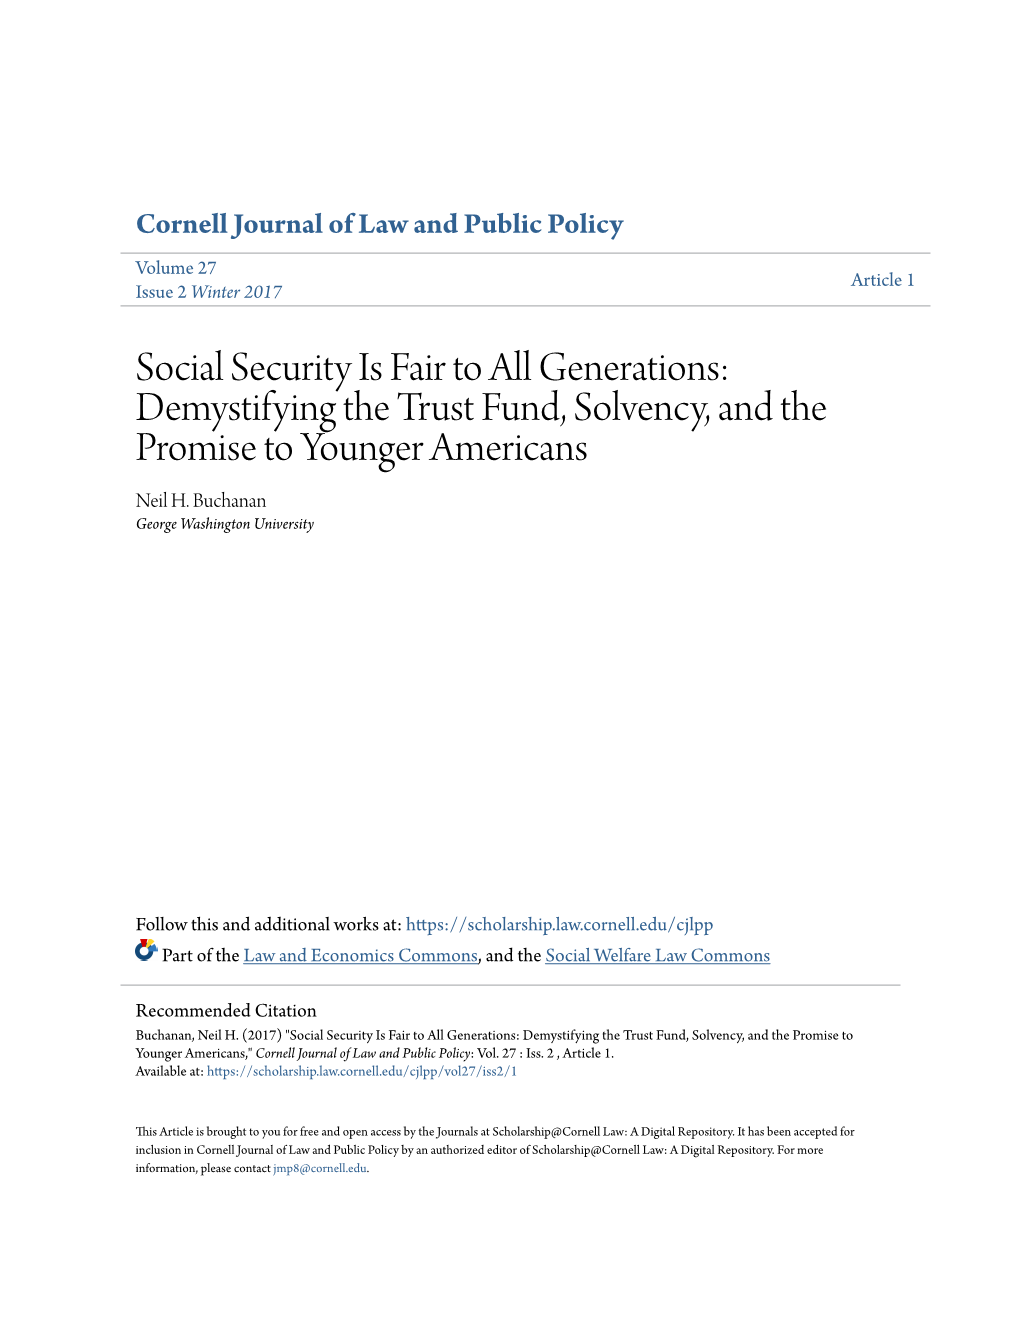 Social Security Is Fair to All Generations: Demystifying the Trust Fund, Solvency, and the Promise to Younger Americans Neil H